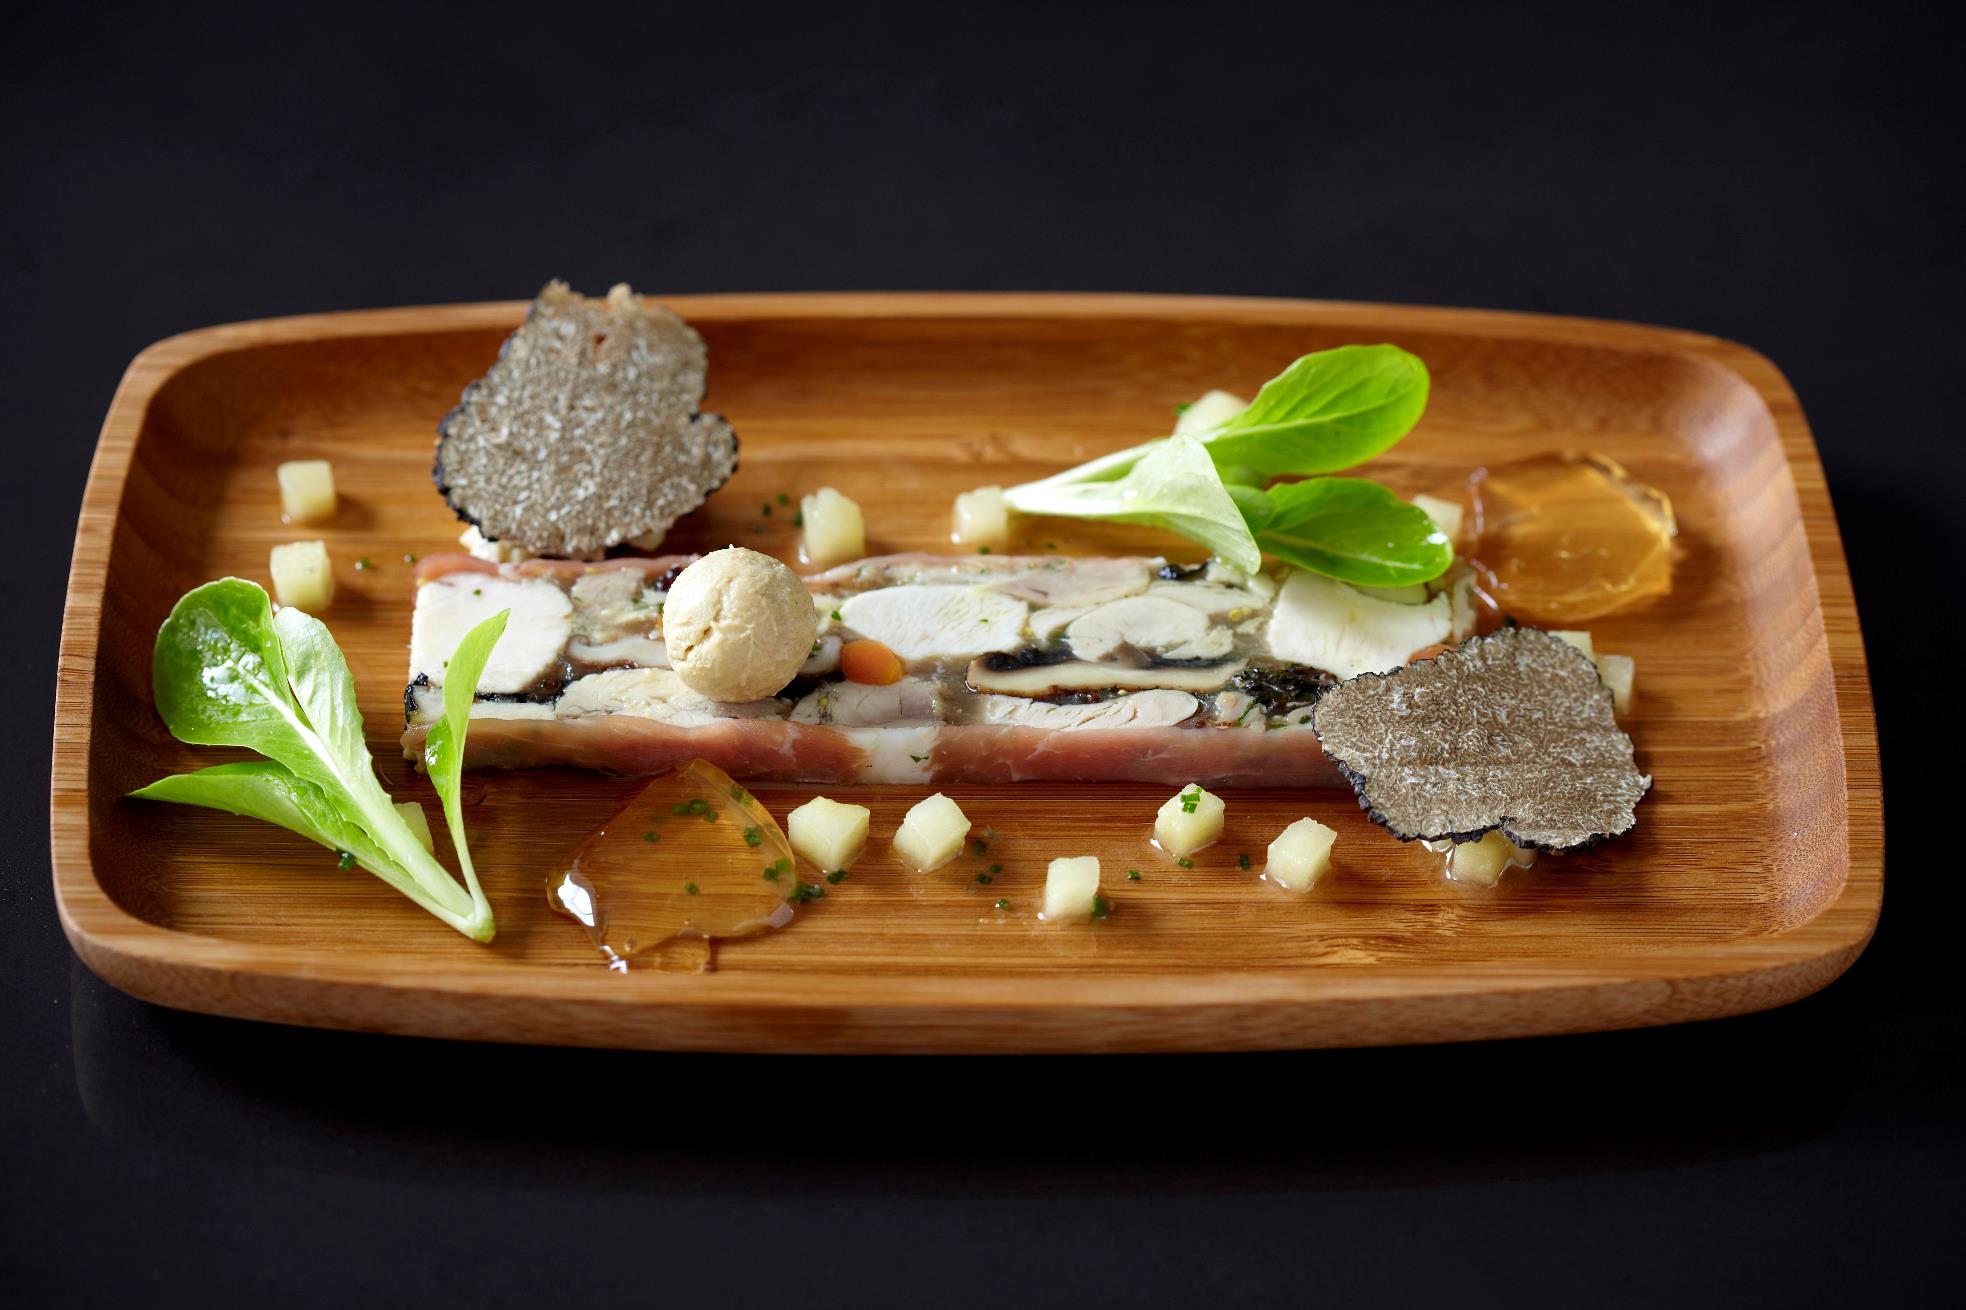 A sample dish from The Greenhouse in South Africa